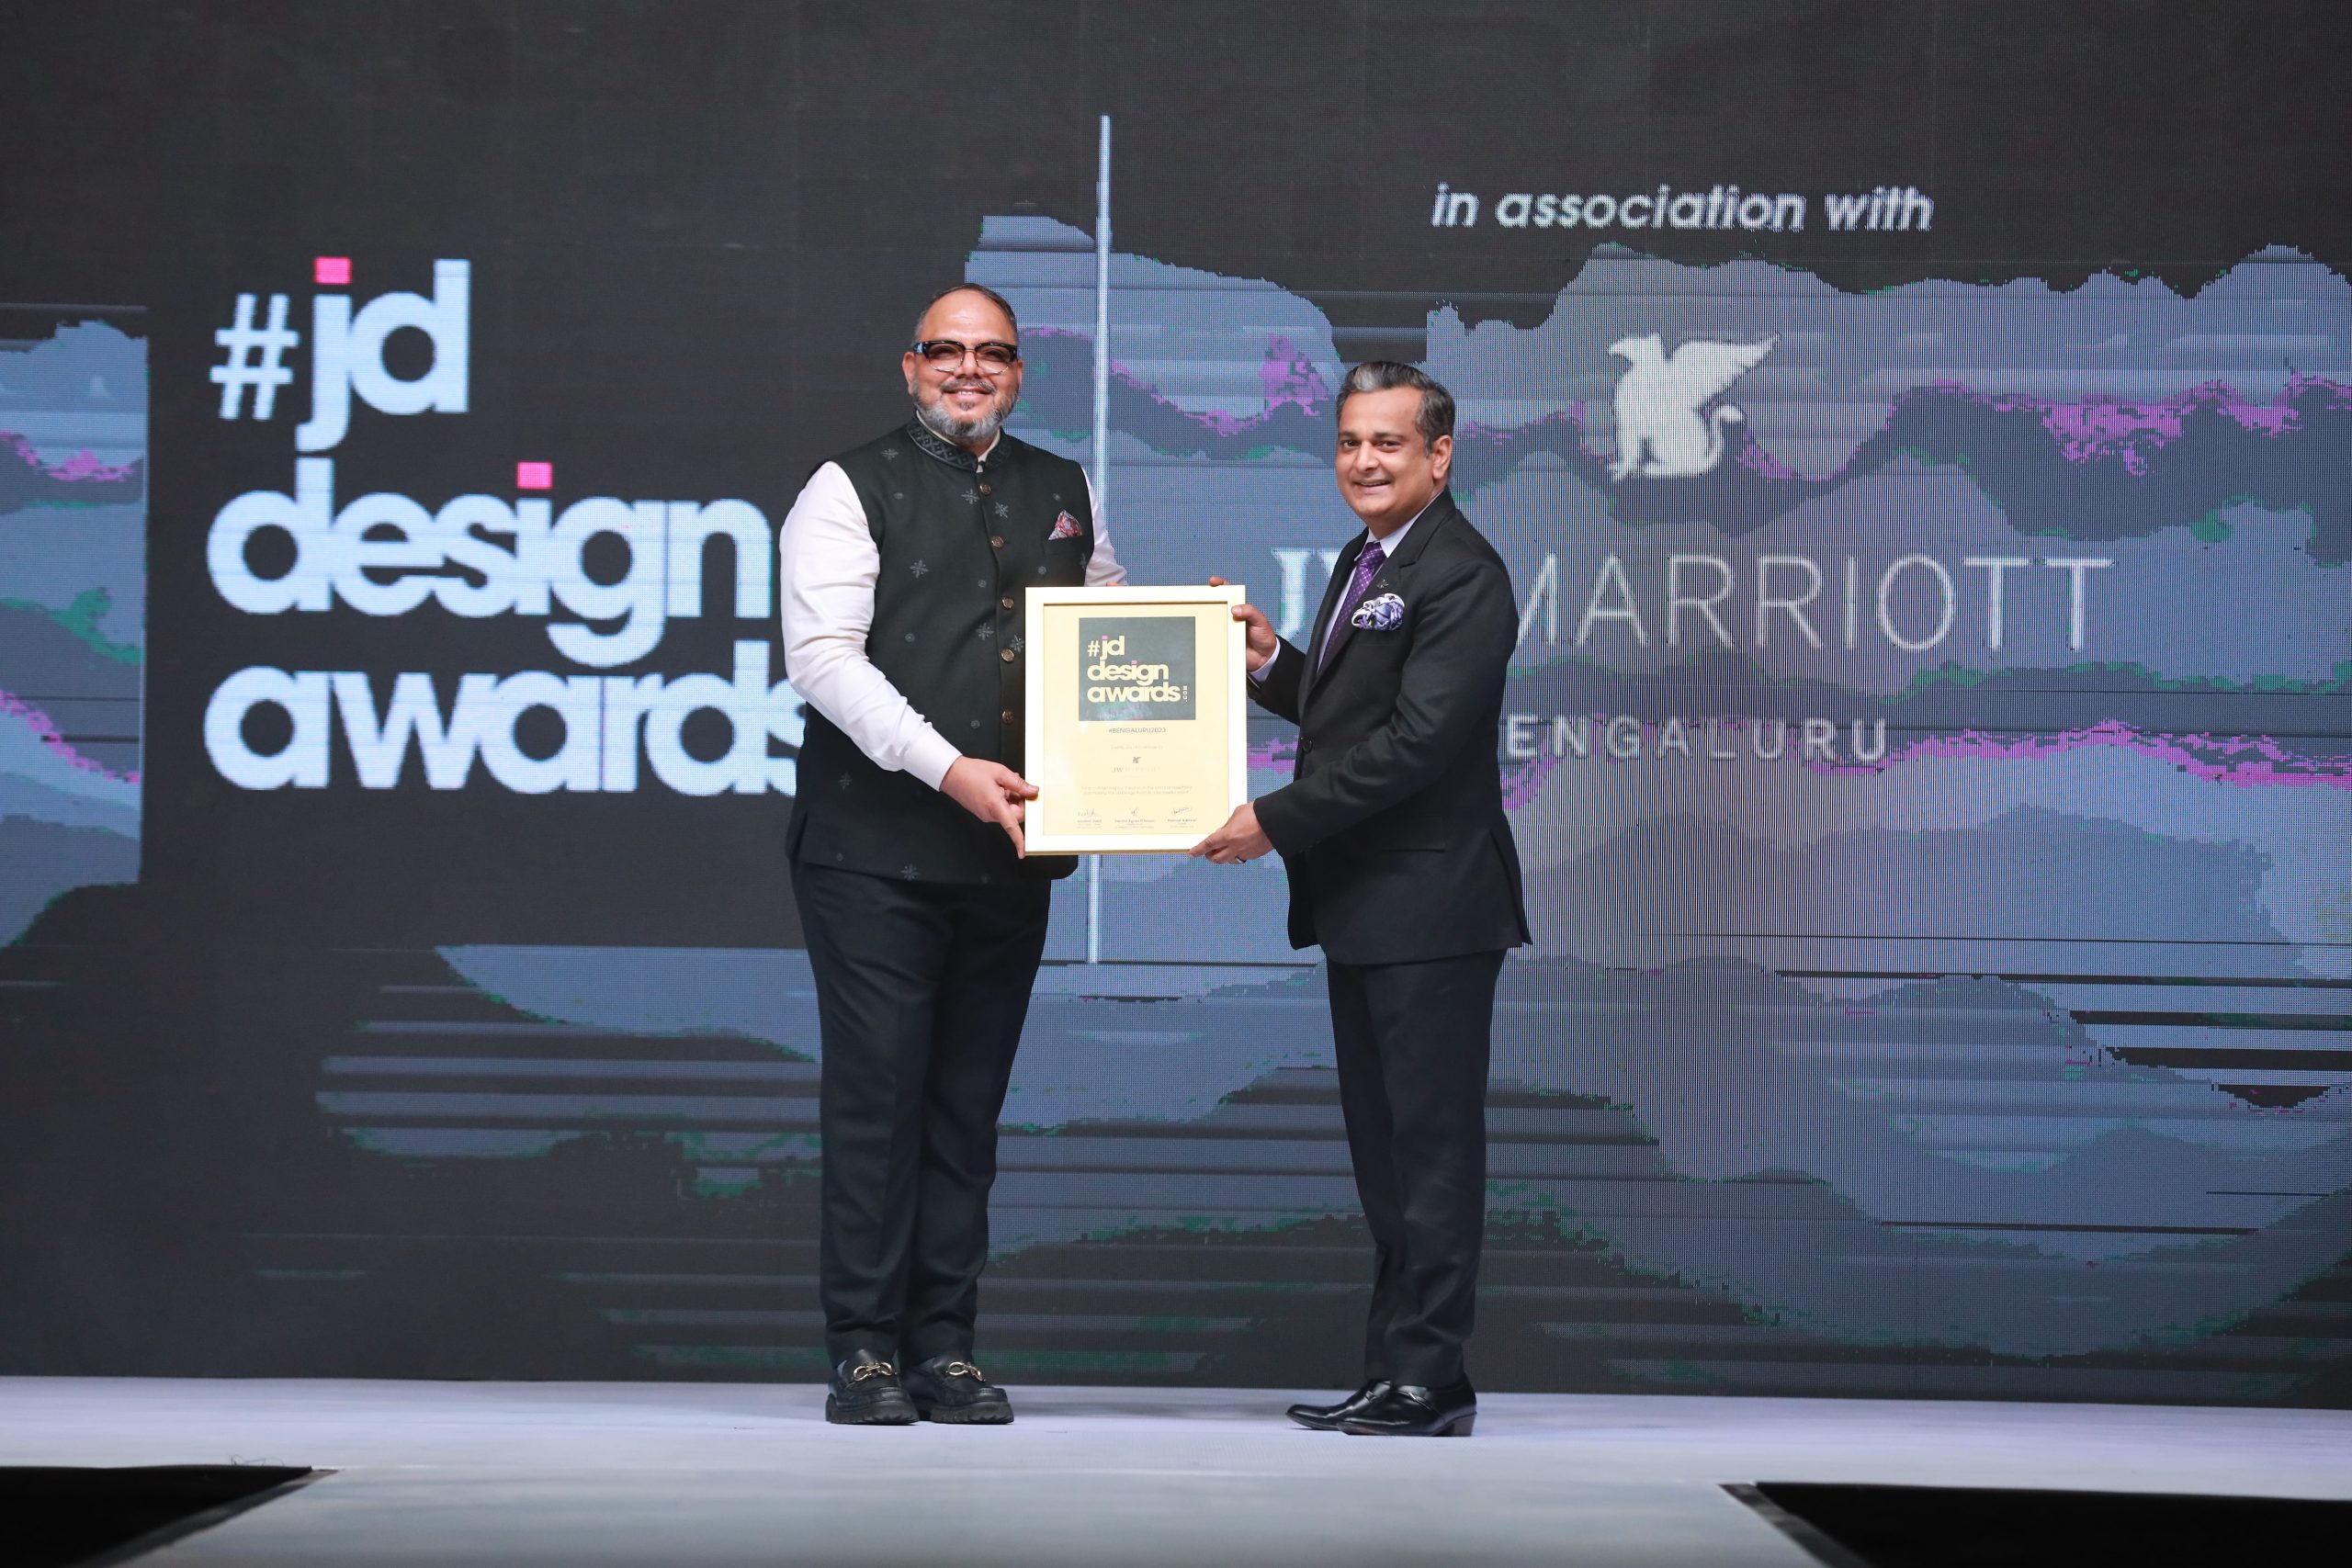 JD Design Awards x JW Marriott Hotel Bengaluru Concludes On A High Note - Mr. Nealesh Dalal with Mr. Gaurav Sinha, Hotel Manager - JW Marriott Hotel Bengaluru